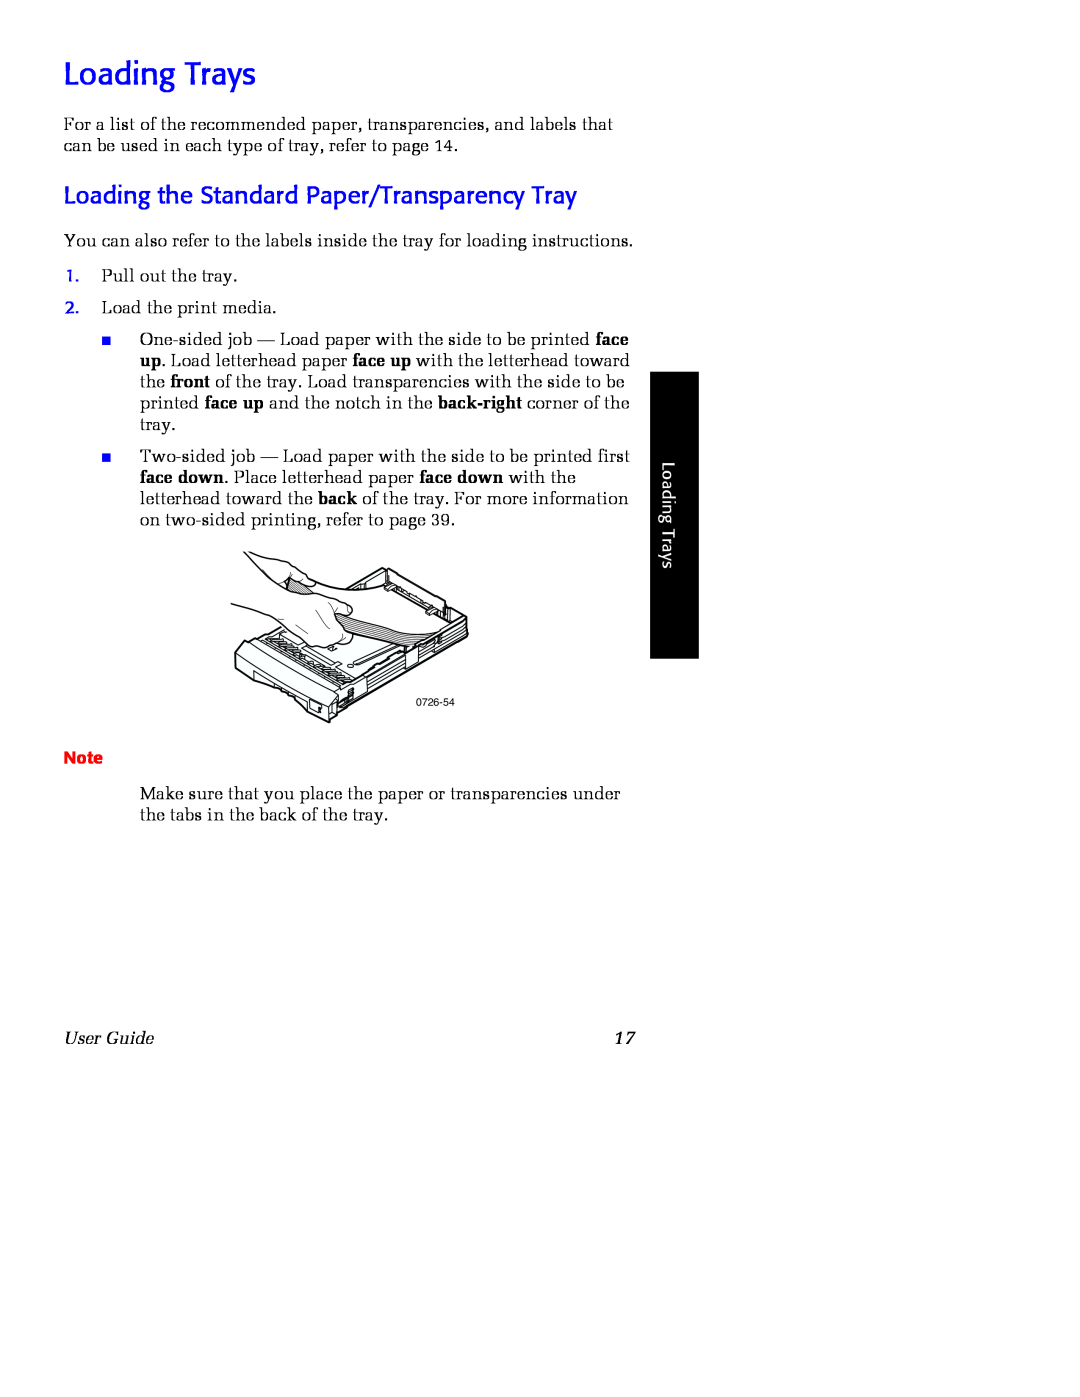 Xerox Phaser 860 manual Loading Trays, Loading the Standard Paper/Transparency Tray, User Guide 